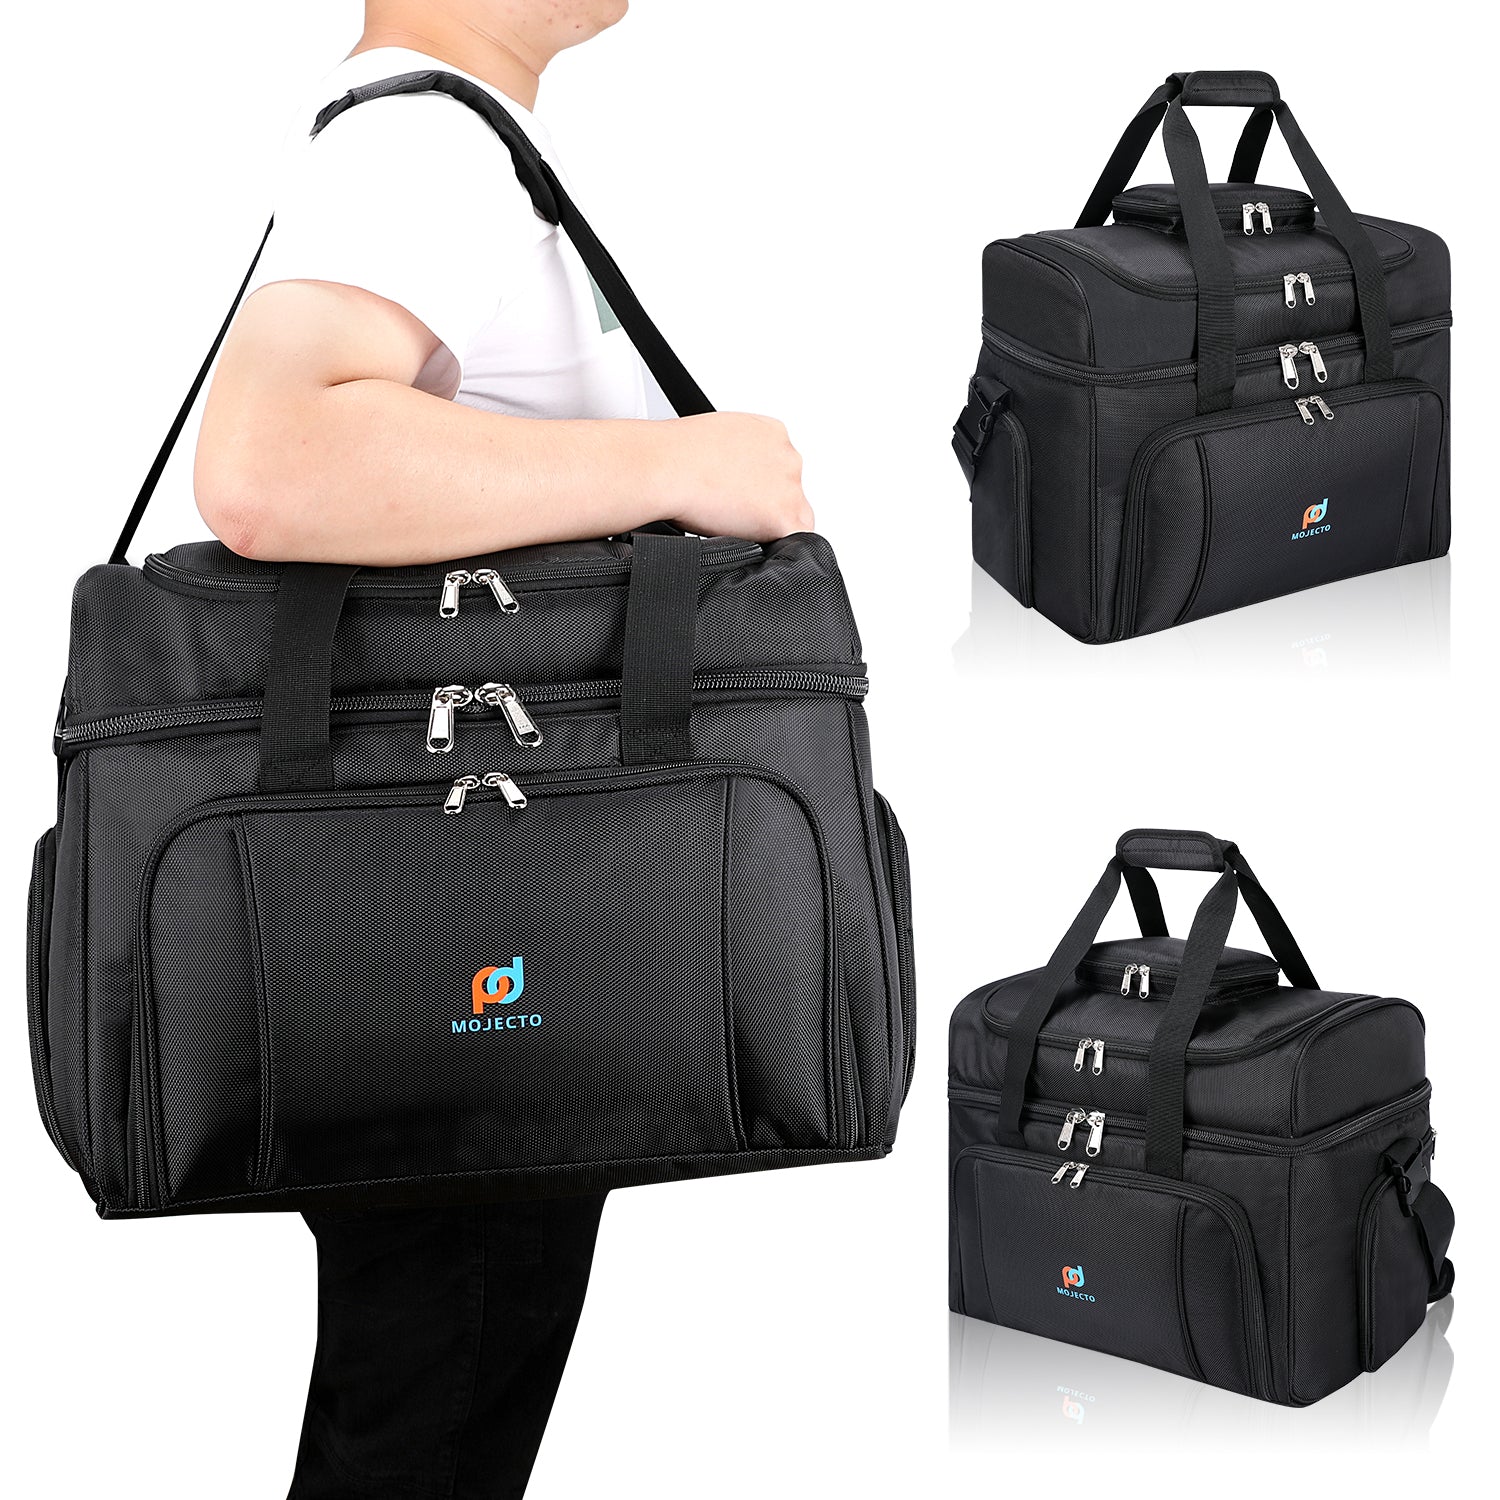 Large Deluxe PEVA Insulated Bag (20x20x10)